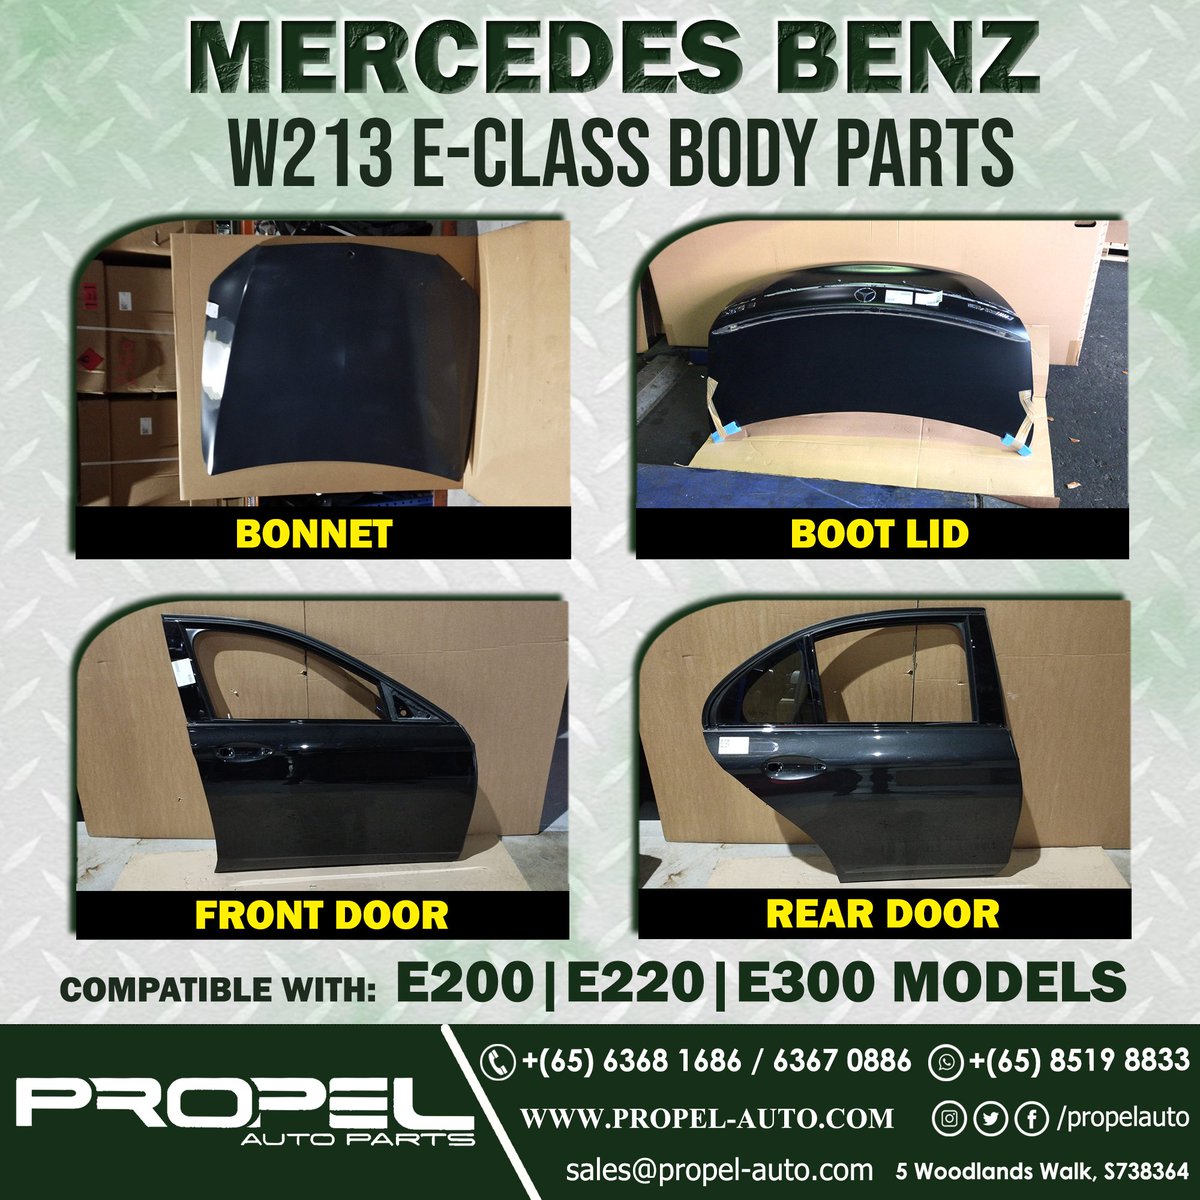 Mercedes W213 E-Class Body Parts - New Stocks available #ForSale Ping us & Shop Genuine BodyParts for your Accidental Car🤗🚗 #W213 #E200 #E250 #E300 #Bonnet #Hood #Bootlid #Trunklid #Doors #doorShell #SGcars #UsedParts #PropelAuto #SingaporeRetailer #Mercedes #Ping #ShopNow